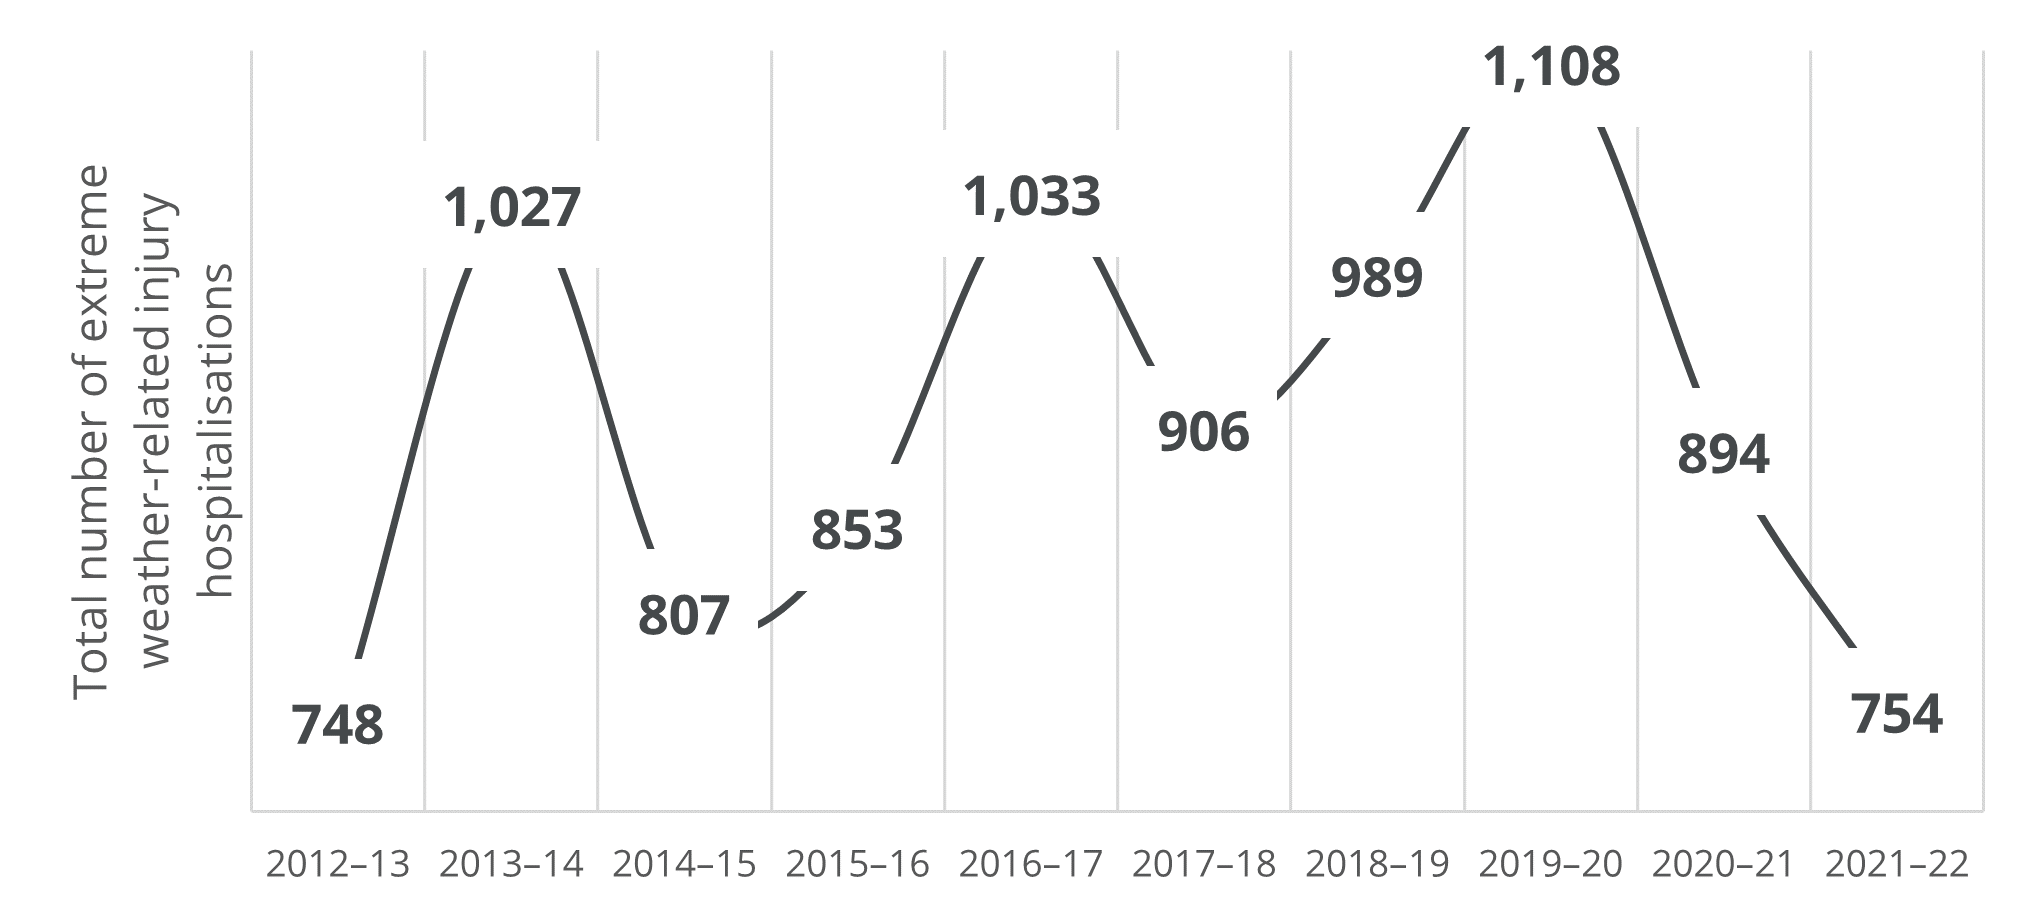 a line chart plotting extreme weather-related injury hospitalisations between 2012–13 and 2021–22 shows numbers rising above 1,000 hospitalisations in 2013–14, 2016–17 and 2019–20.